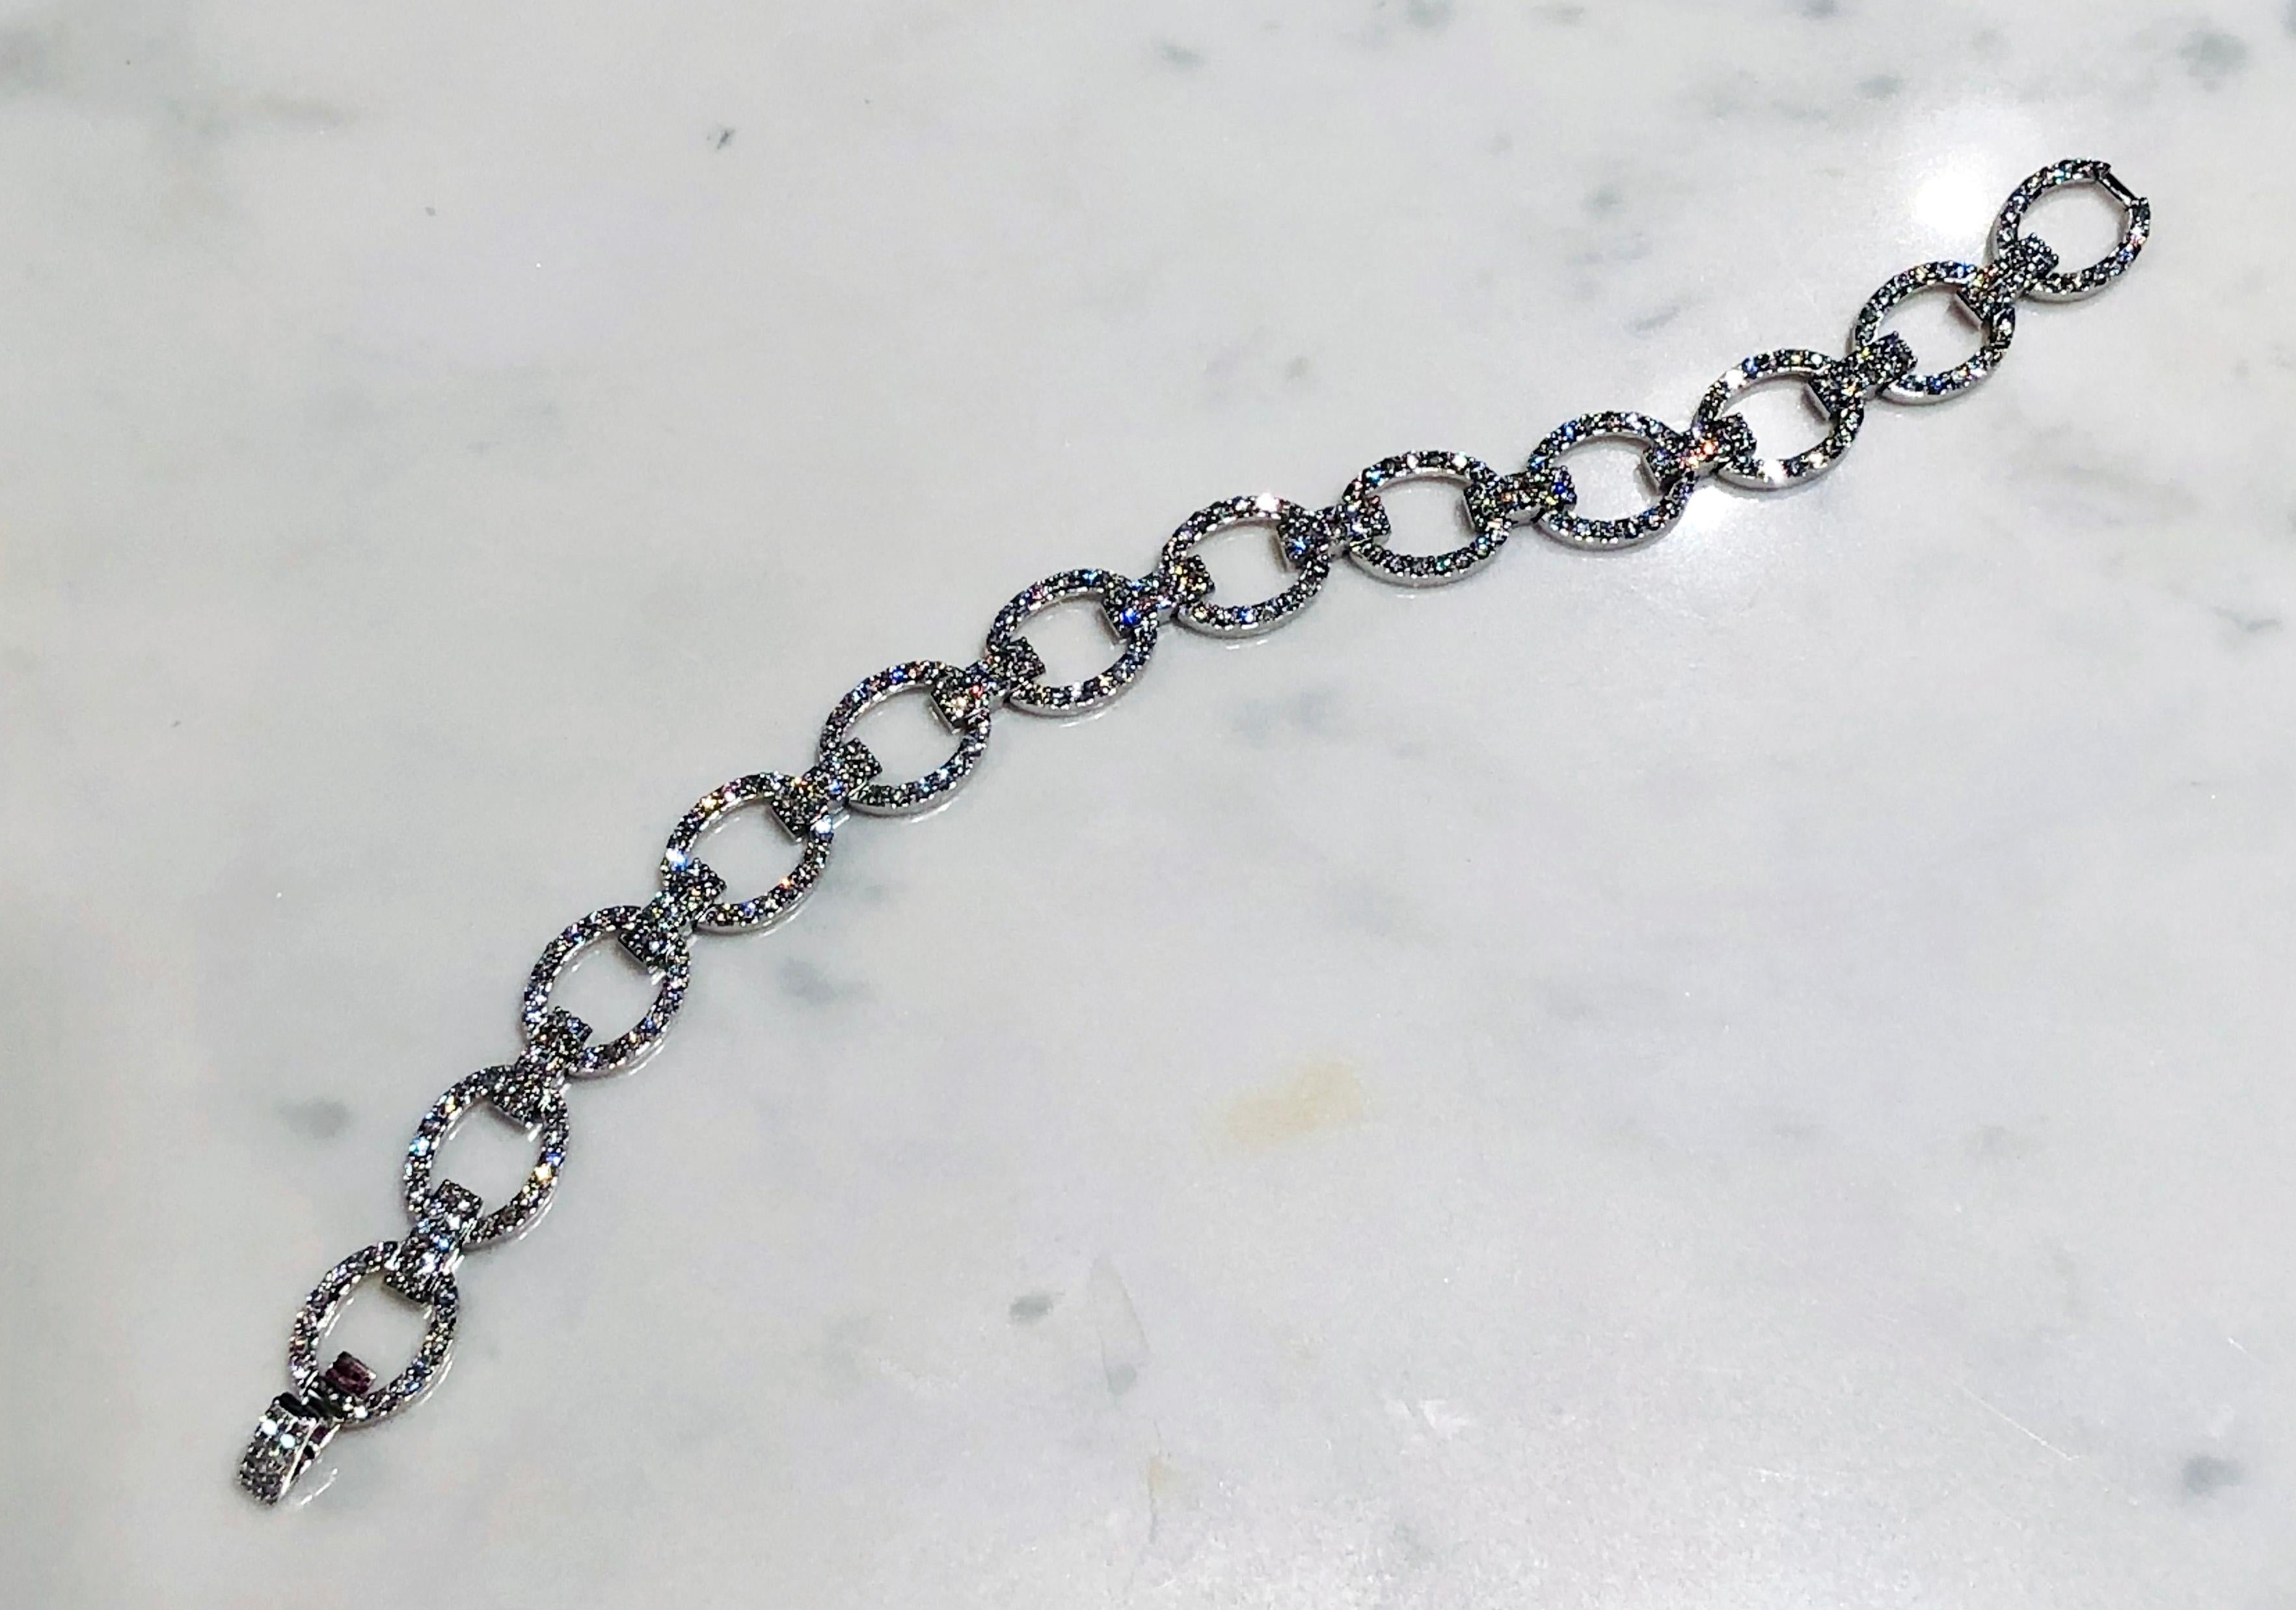 One 18ct White Gold Diamond Fancy Link Bracelet
Bracelet contains oval Diamond set Links
Total Diamond Weight: 4.26ct
Total Length: 7inches/18cm
Videos available on request.

This stunning diamond bracelet is show stopping piece. The diamond set